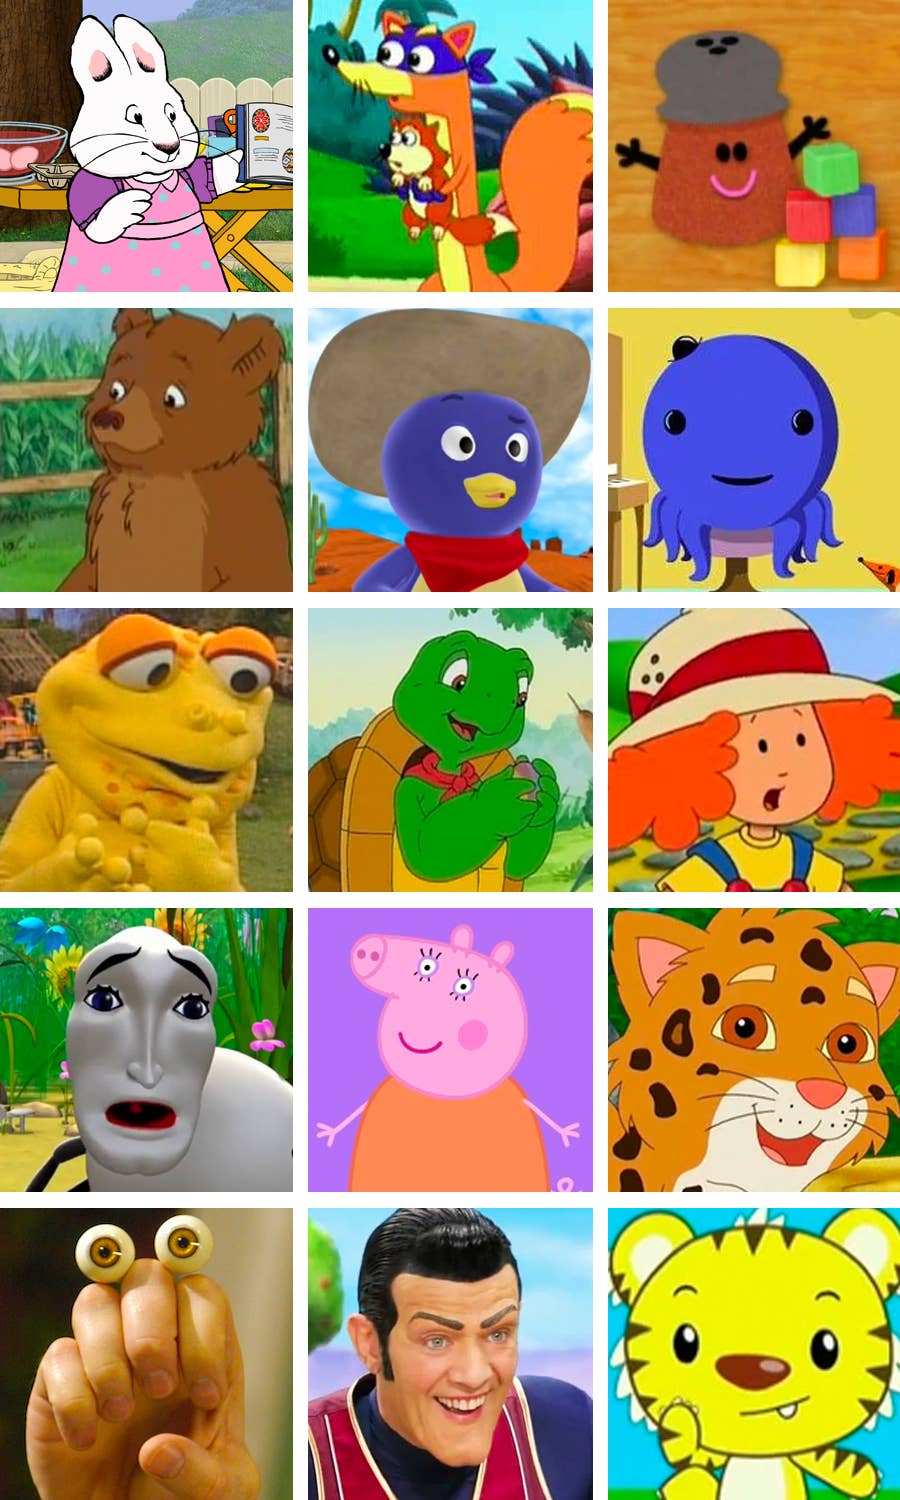 Can You Identify These Nick Jr. Characters?